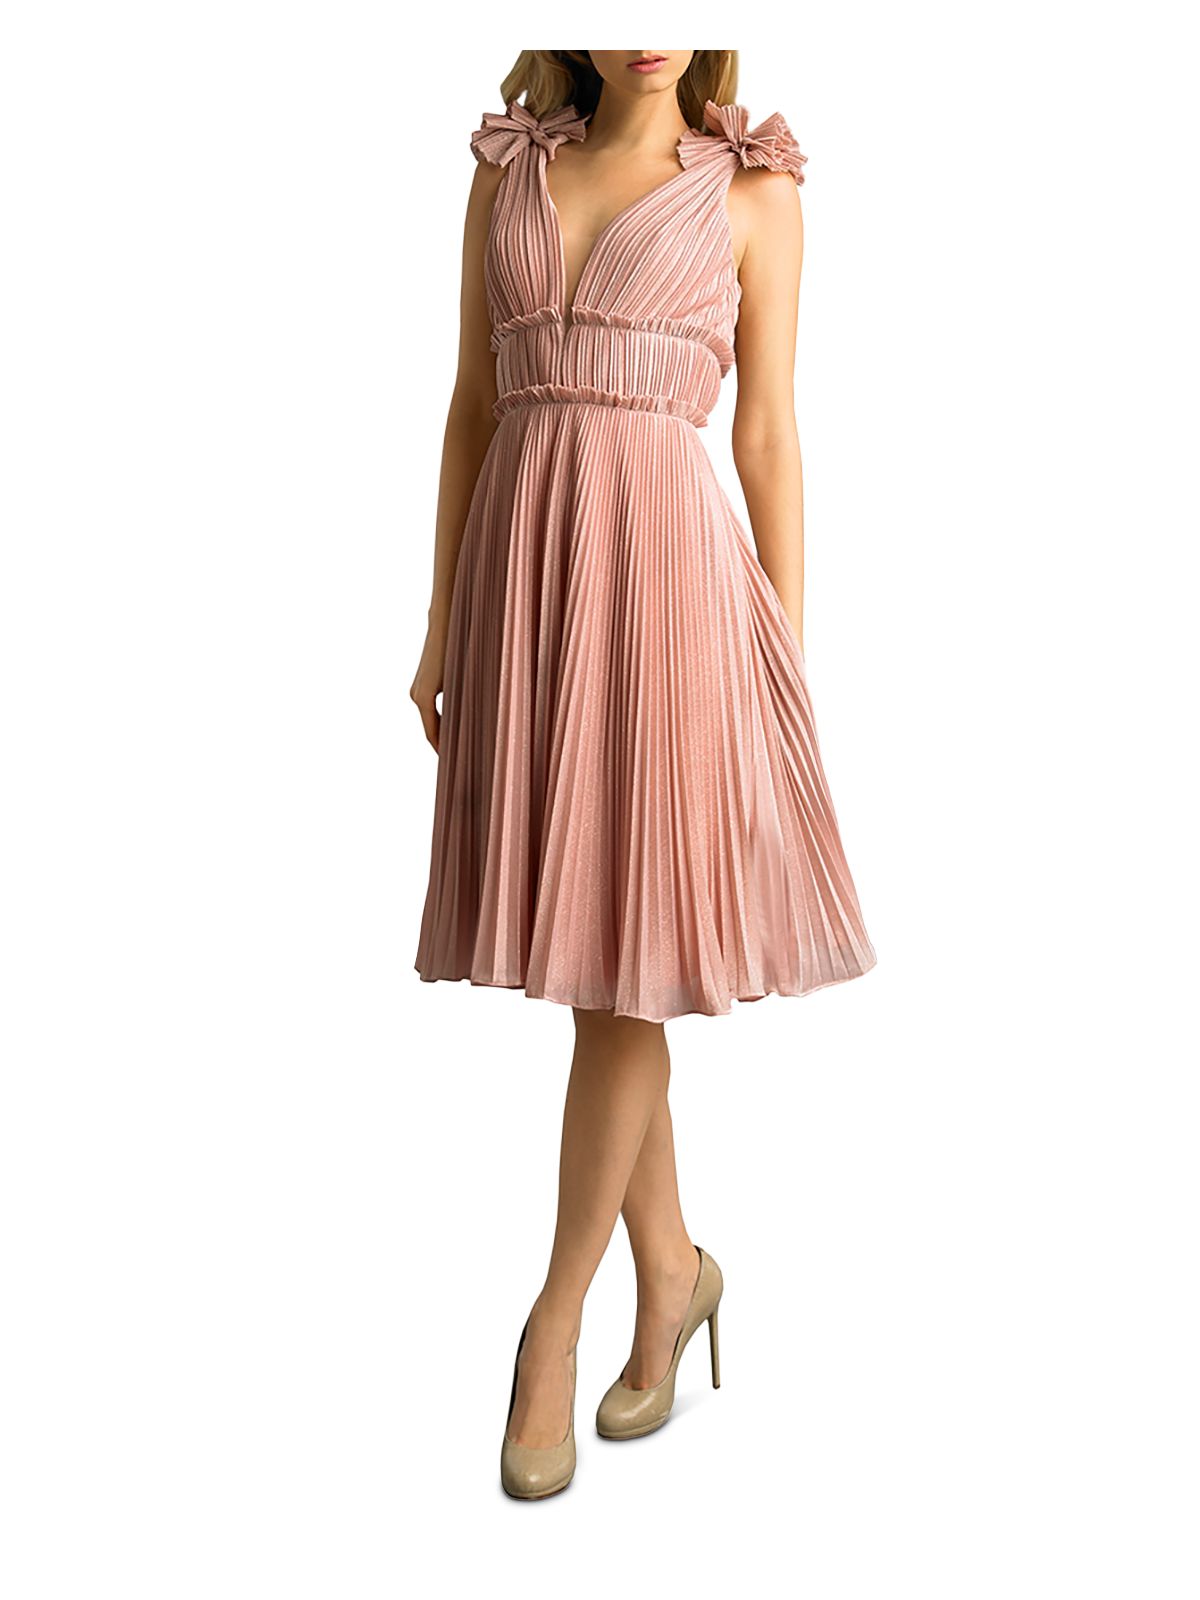 Basix Womens Pink Pleated Bows Added On Straps Spaghetti Strap V Neck Below The Knee Evening Fit + Flare Dress 4